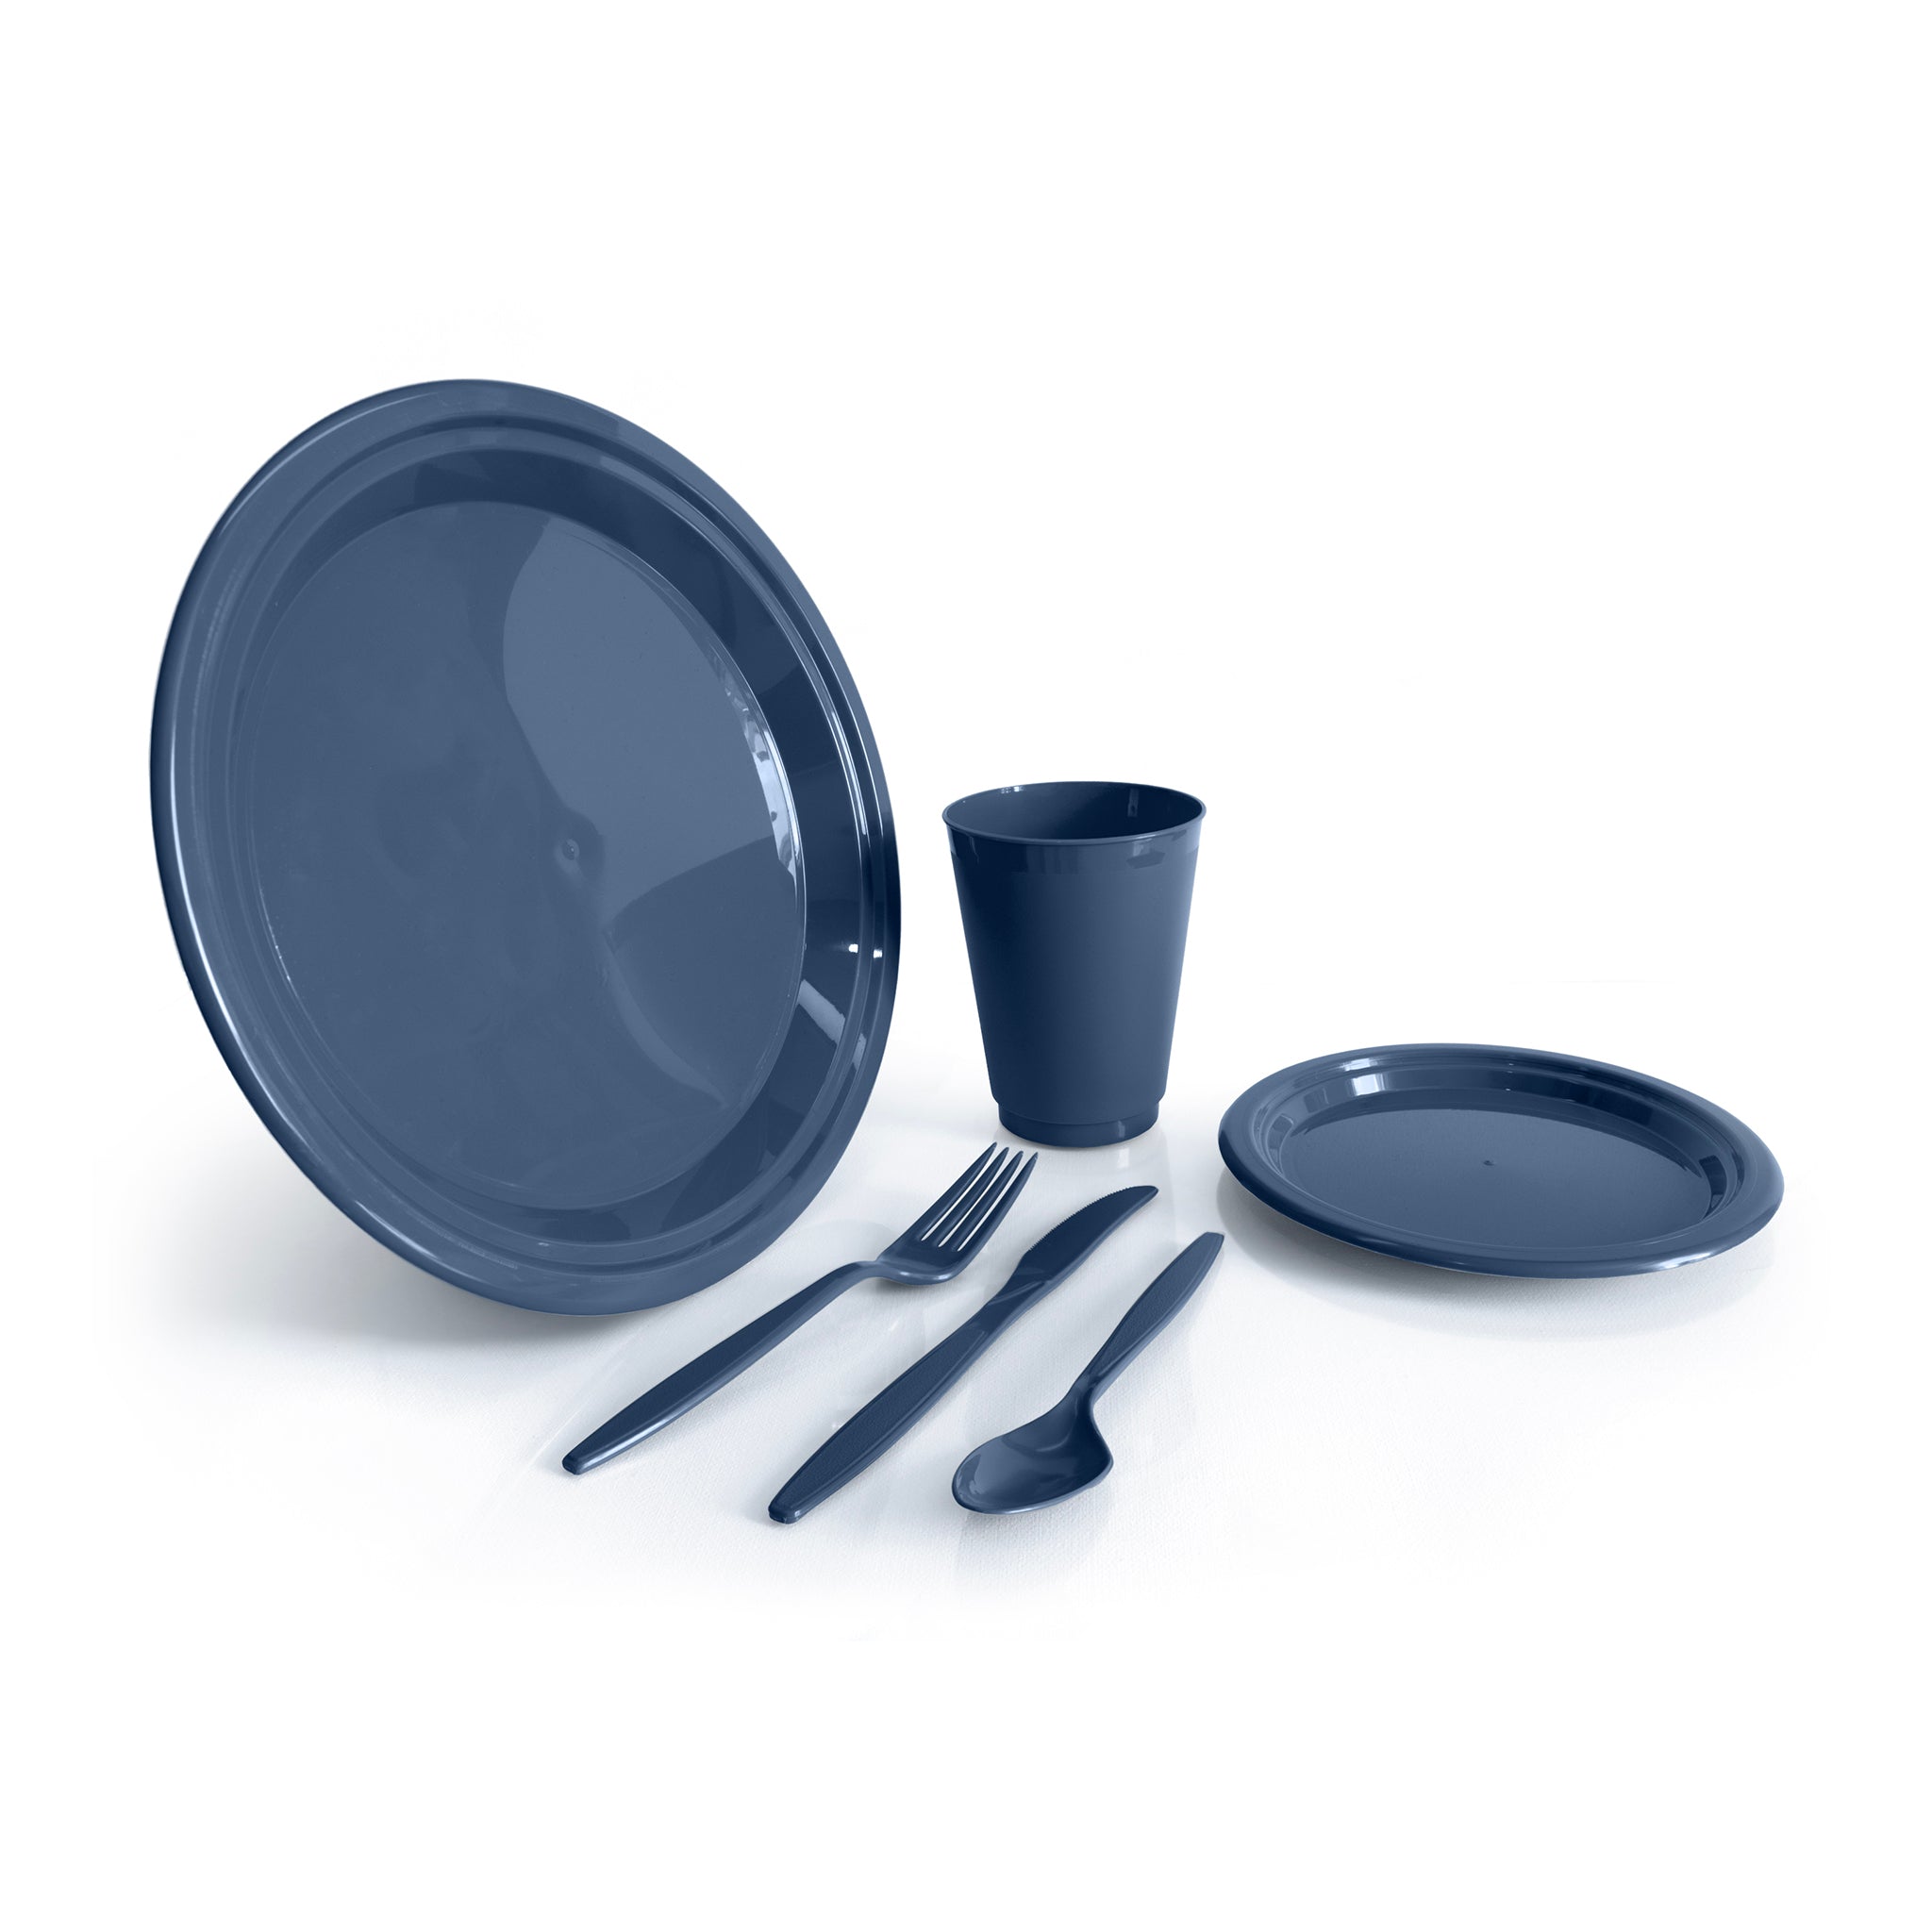 Plastic plates, cup and cutlery